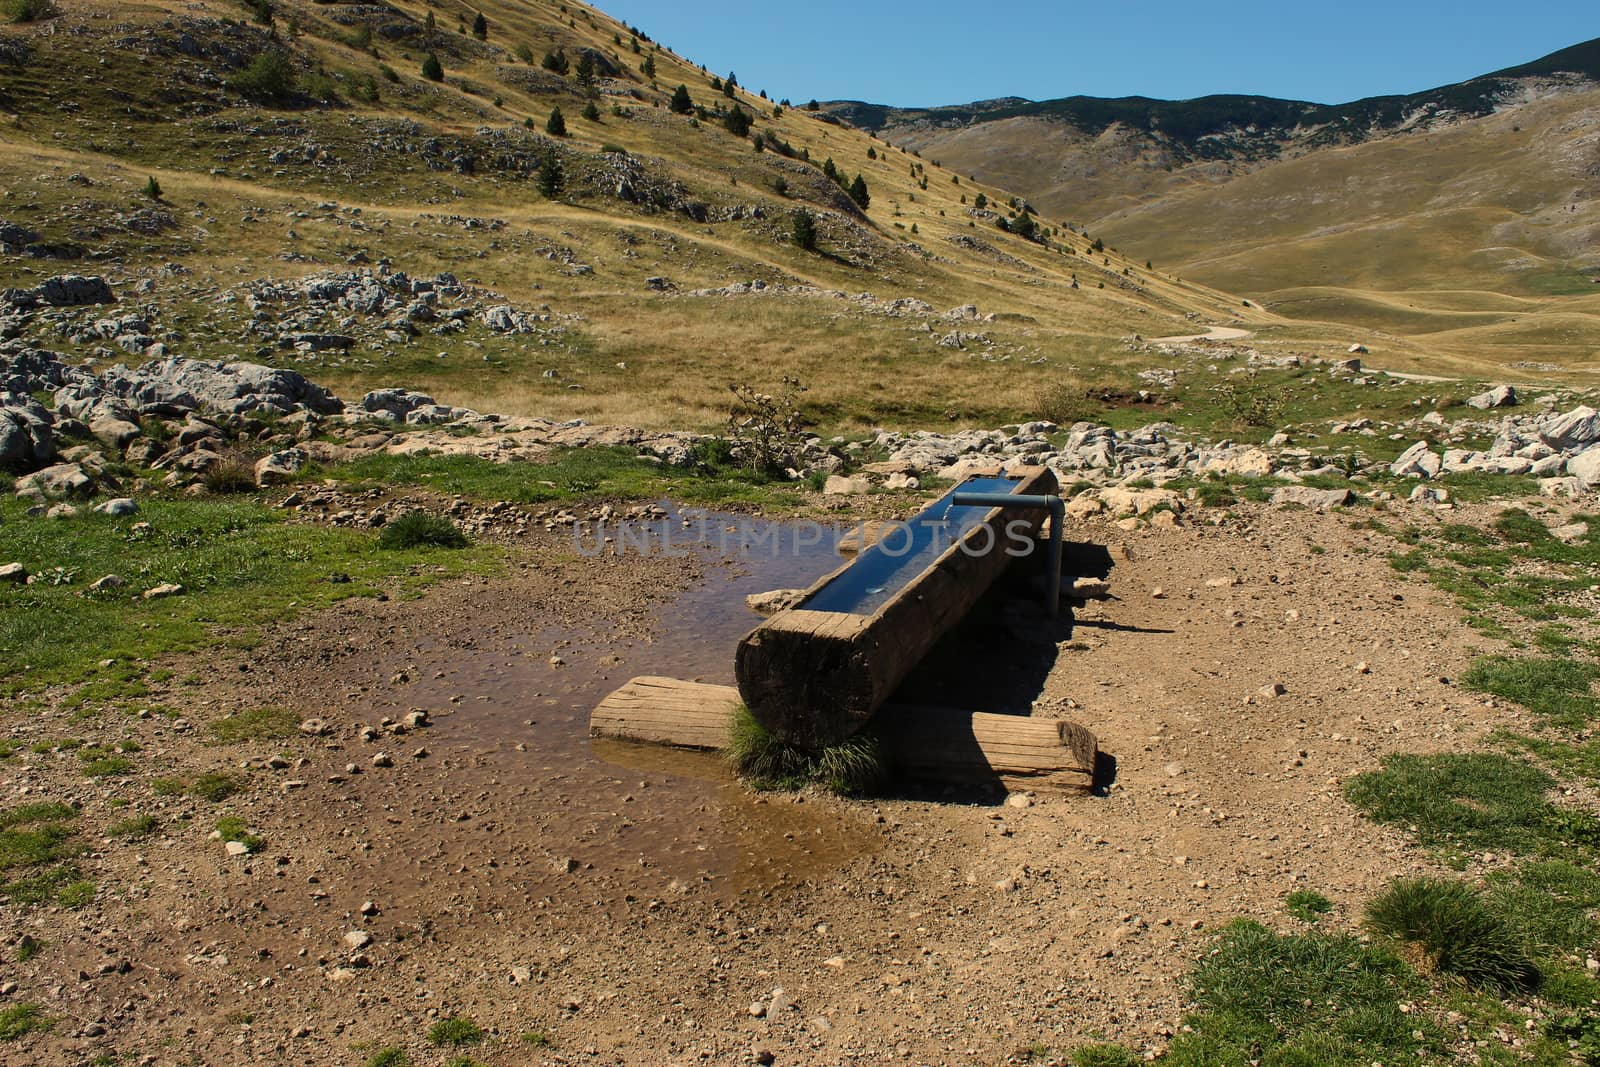 A log dug for water, water for domestic cattle to be able to survive on the mountain. Bjelasnica Mountain, Bosnia and Herzegovina.